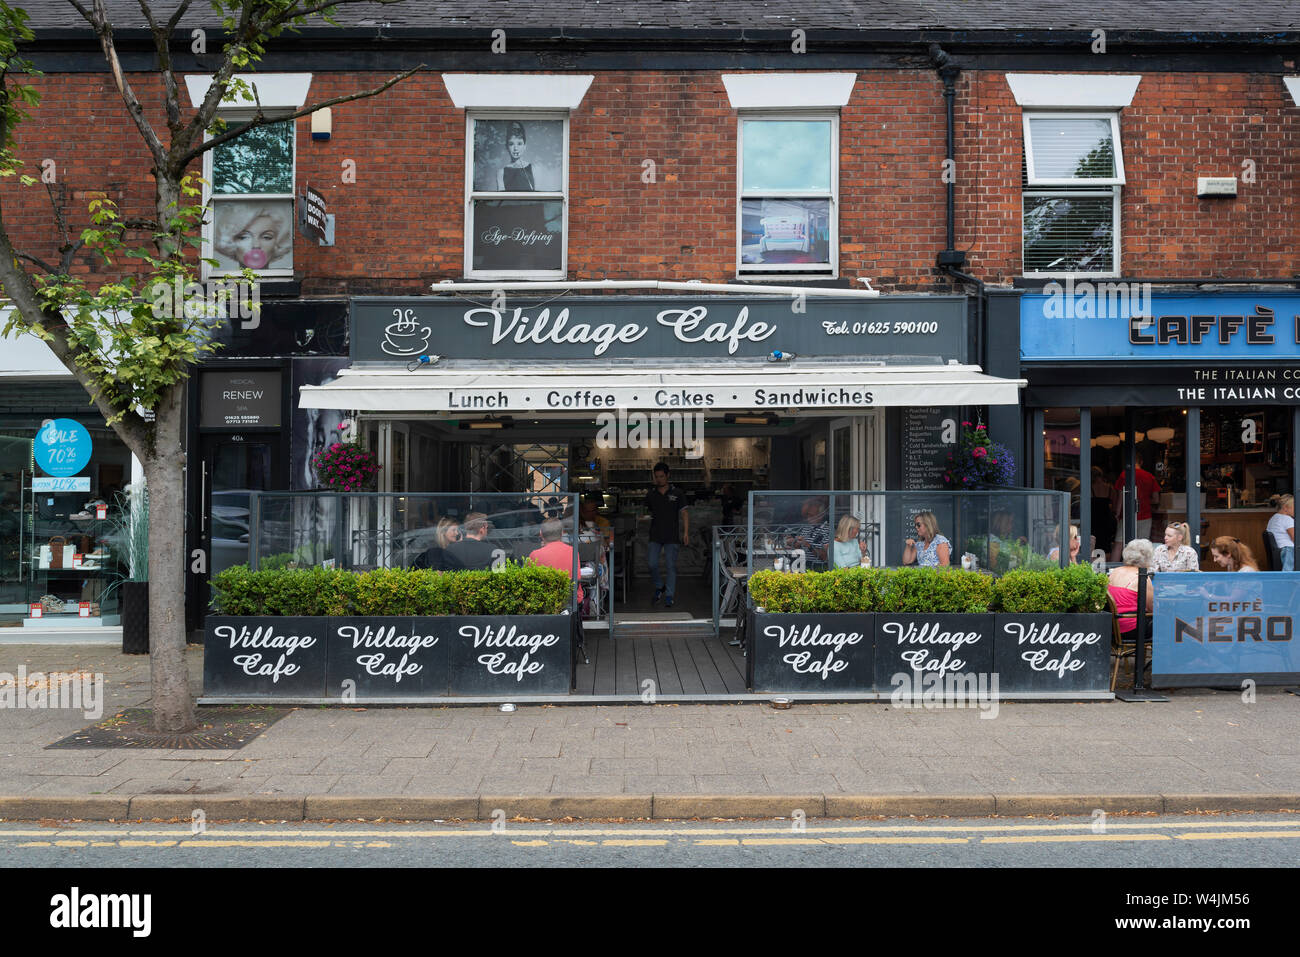 The Village Cafe located on London Road the small town of Alderley Edge in Cheshire, UK. Stock Photo